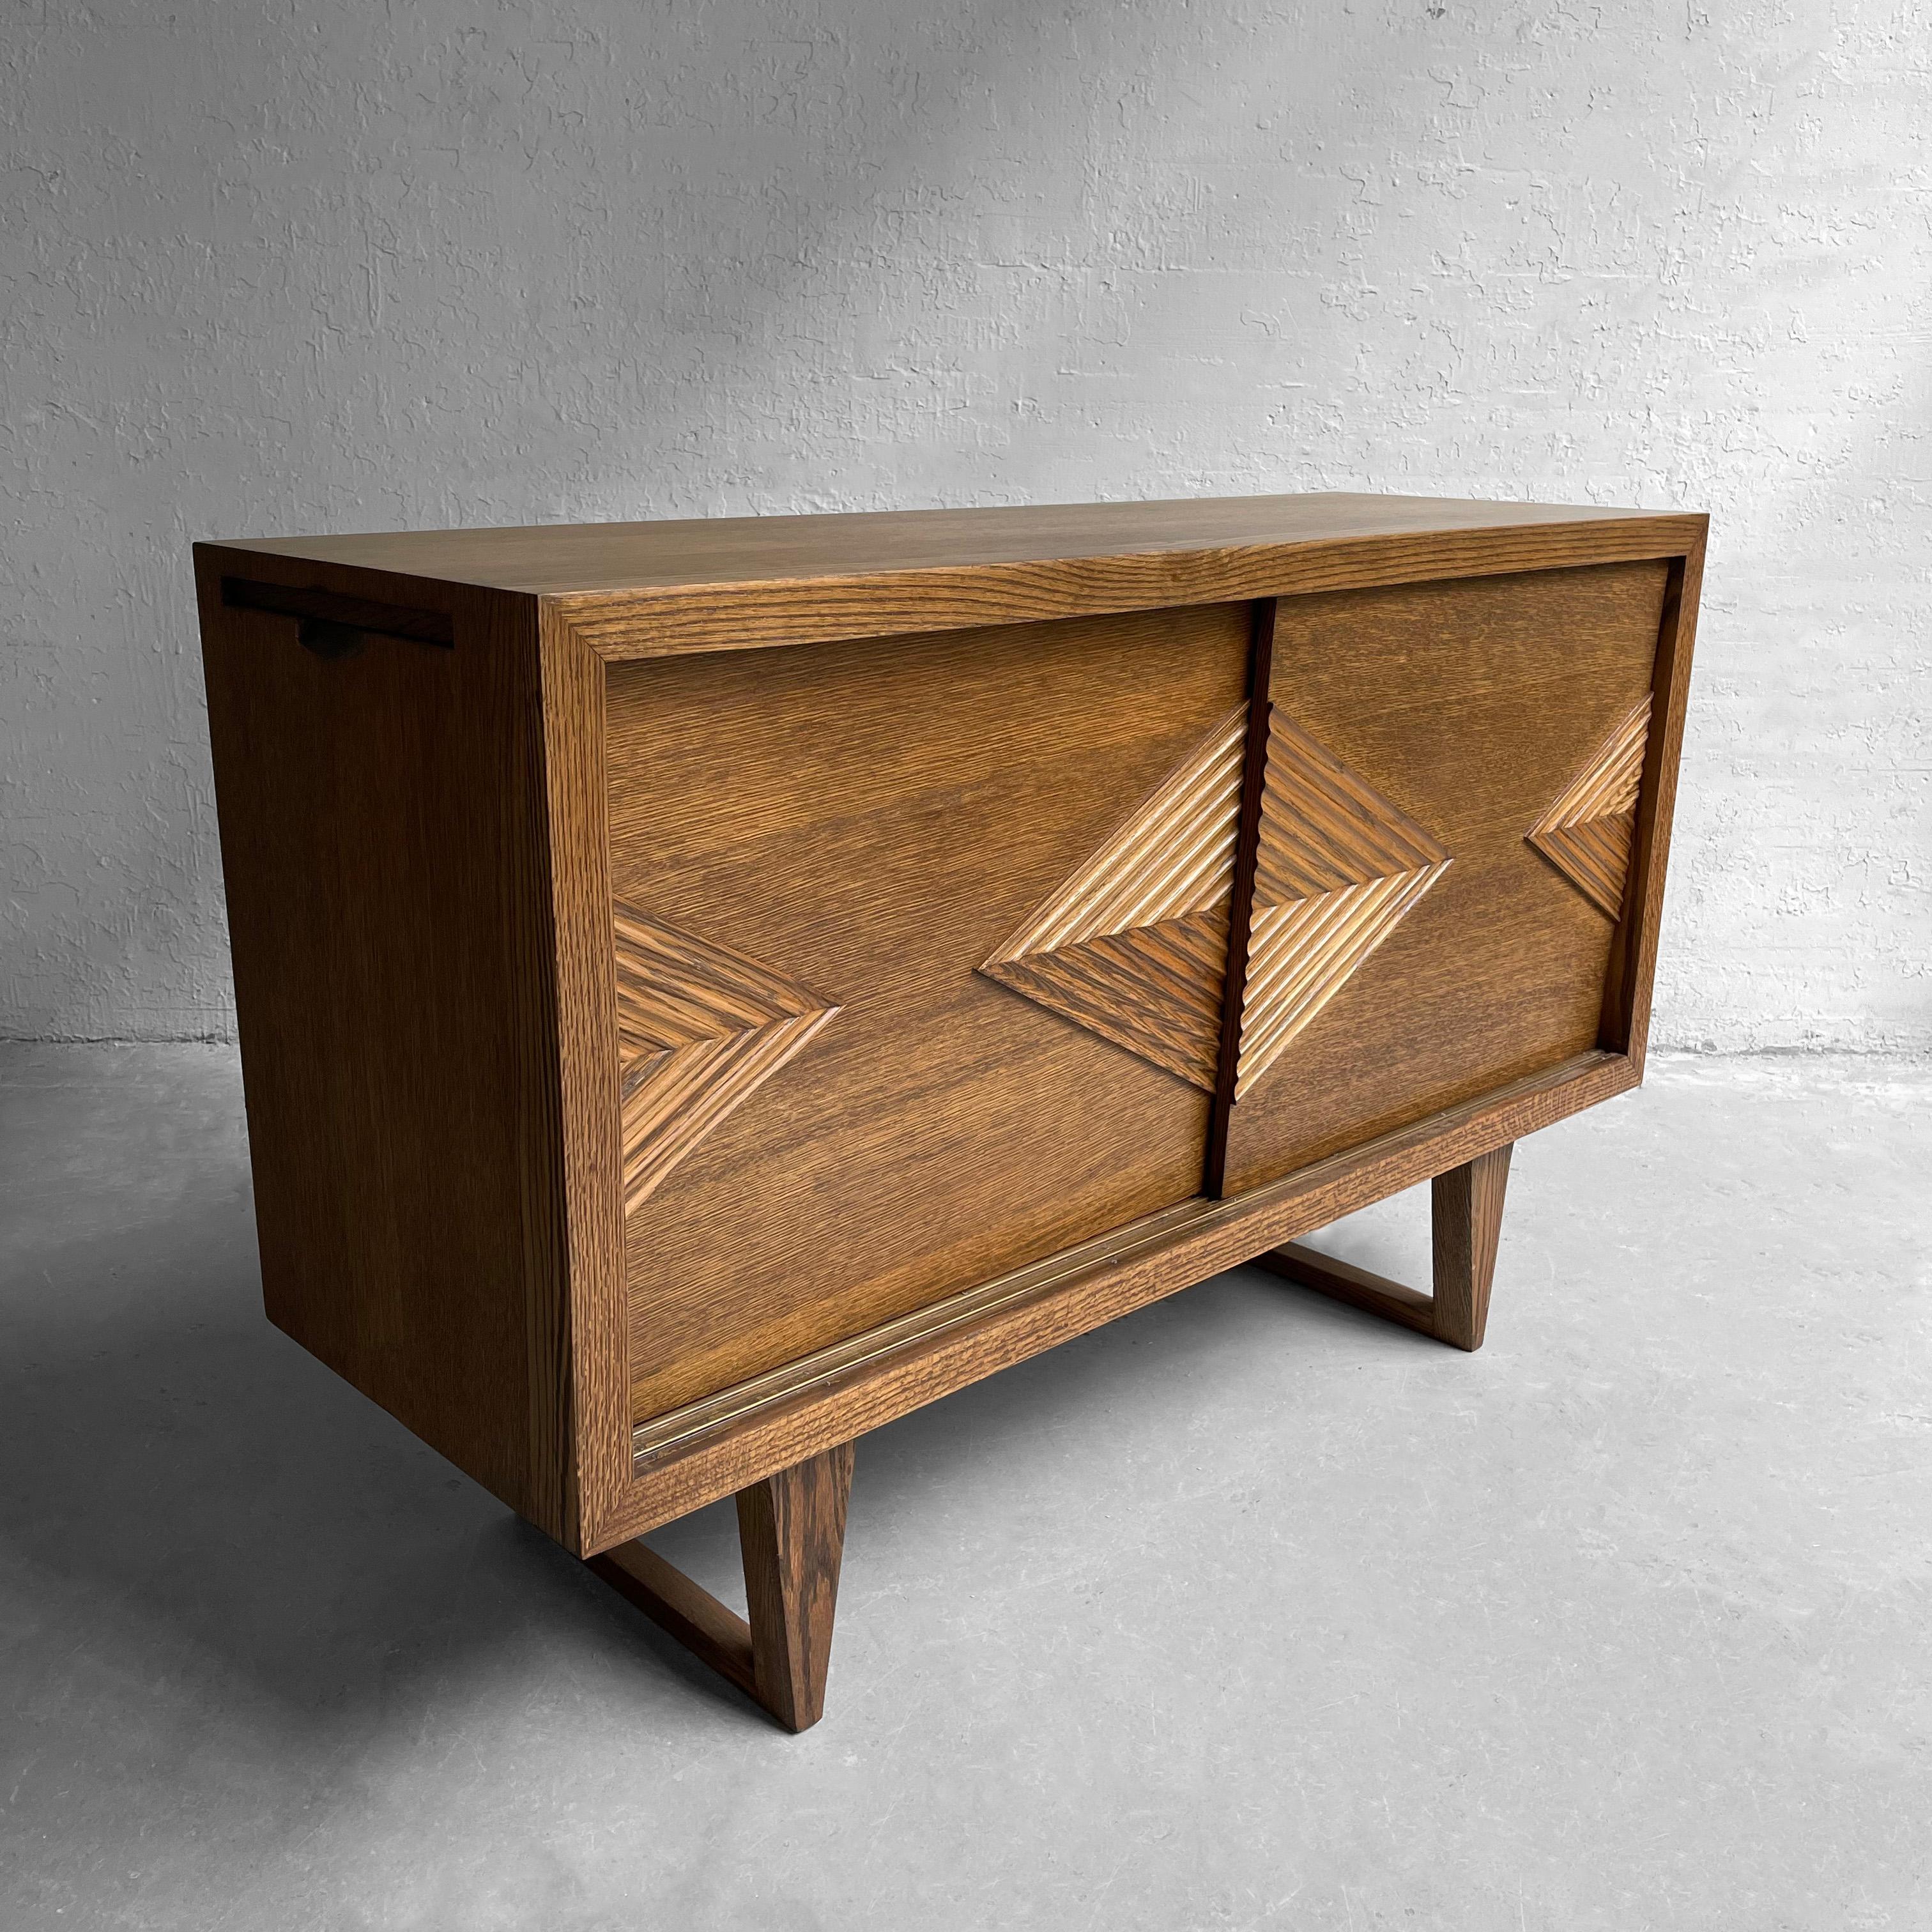 American Midcentury Chevron Front Oak Sideboard Credenza For Sale